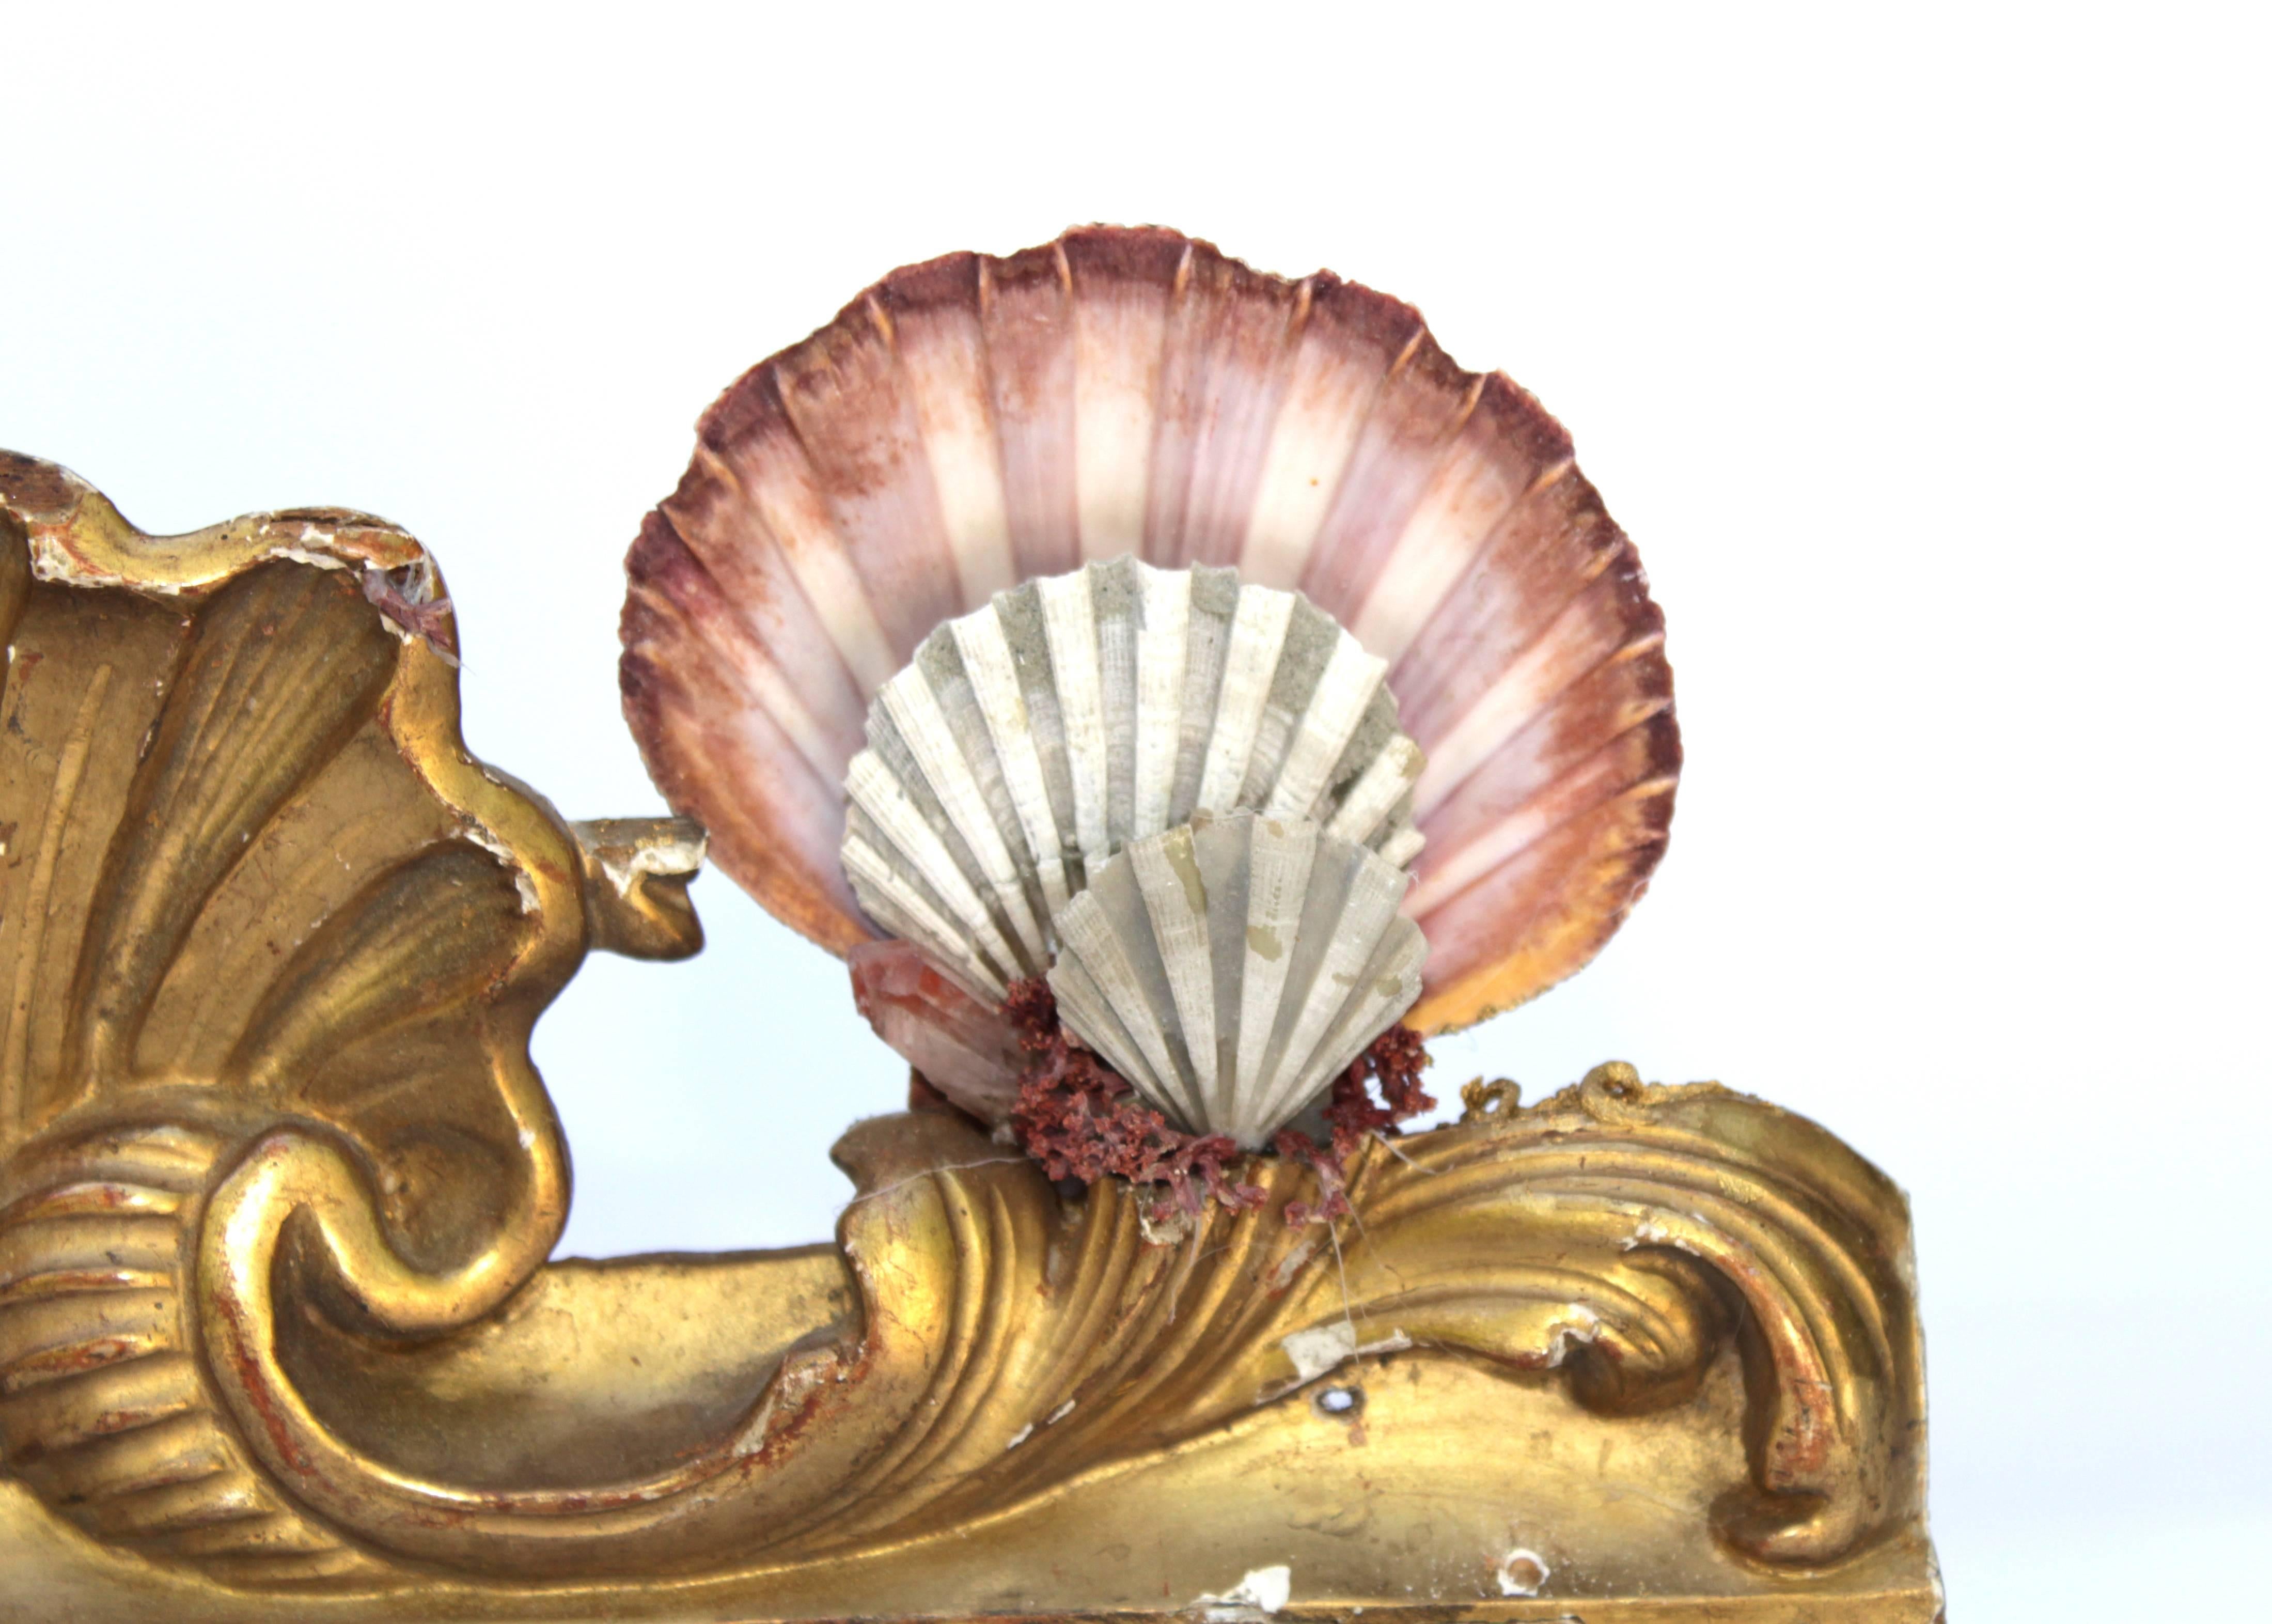 19th century Italian gold pedestal fragment decorated with fossil pectin shells and red phantom quartz crystals on a Lucite base.